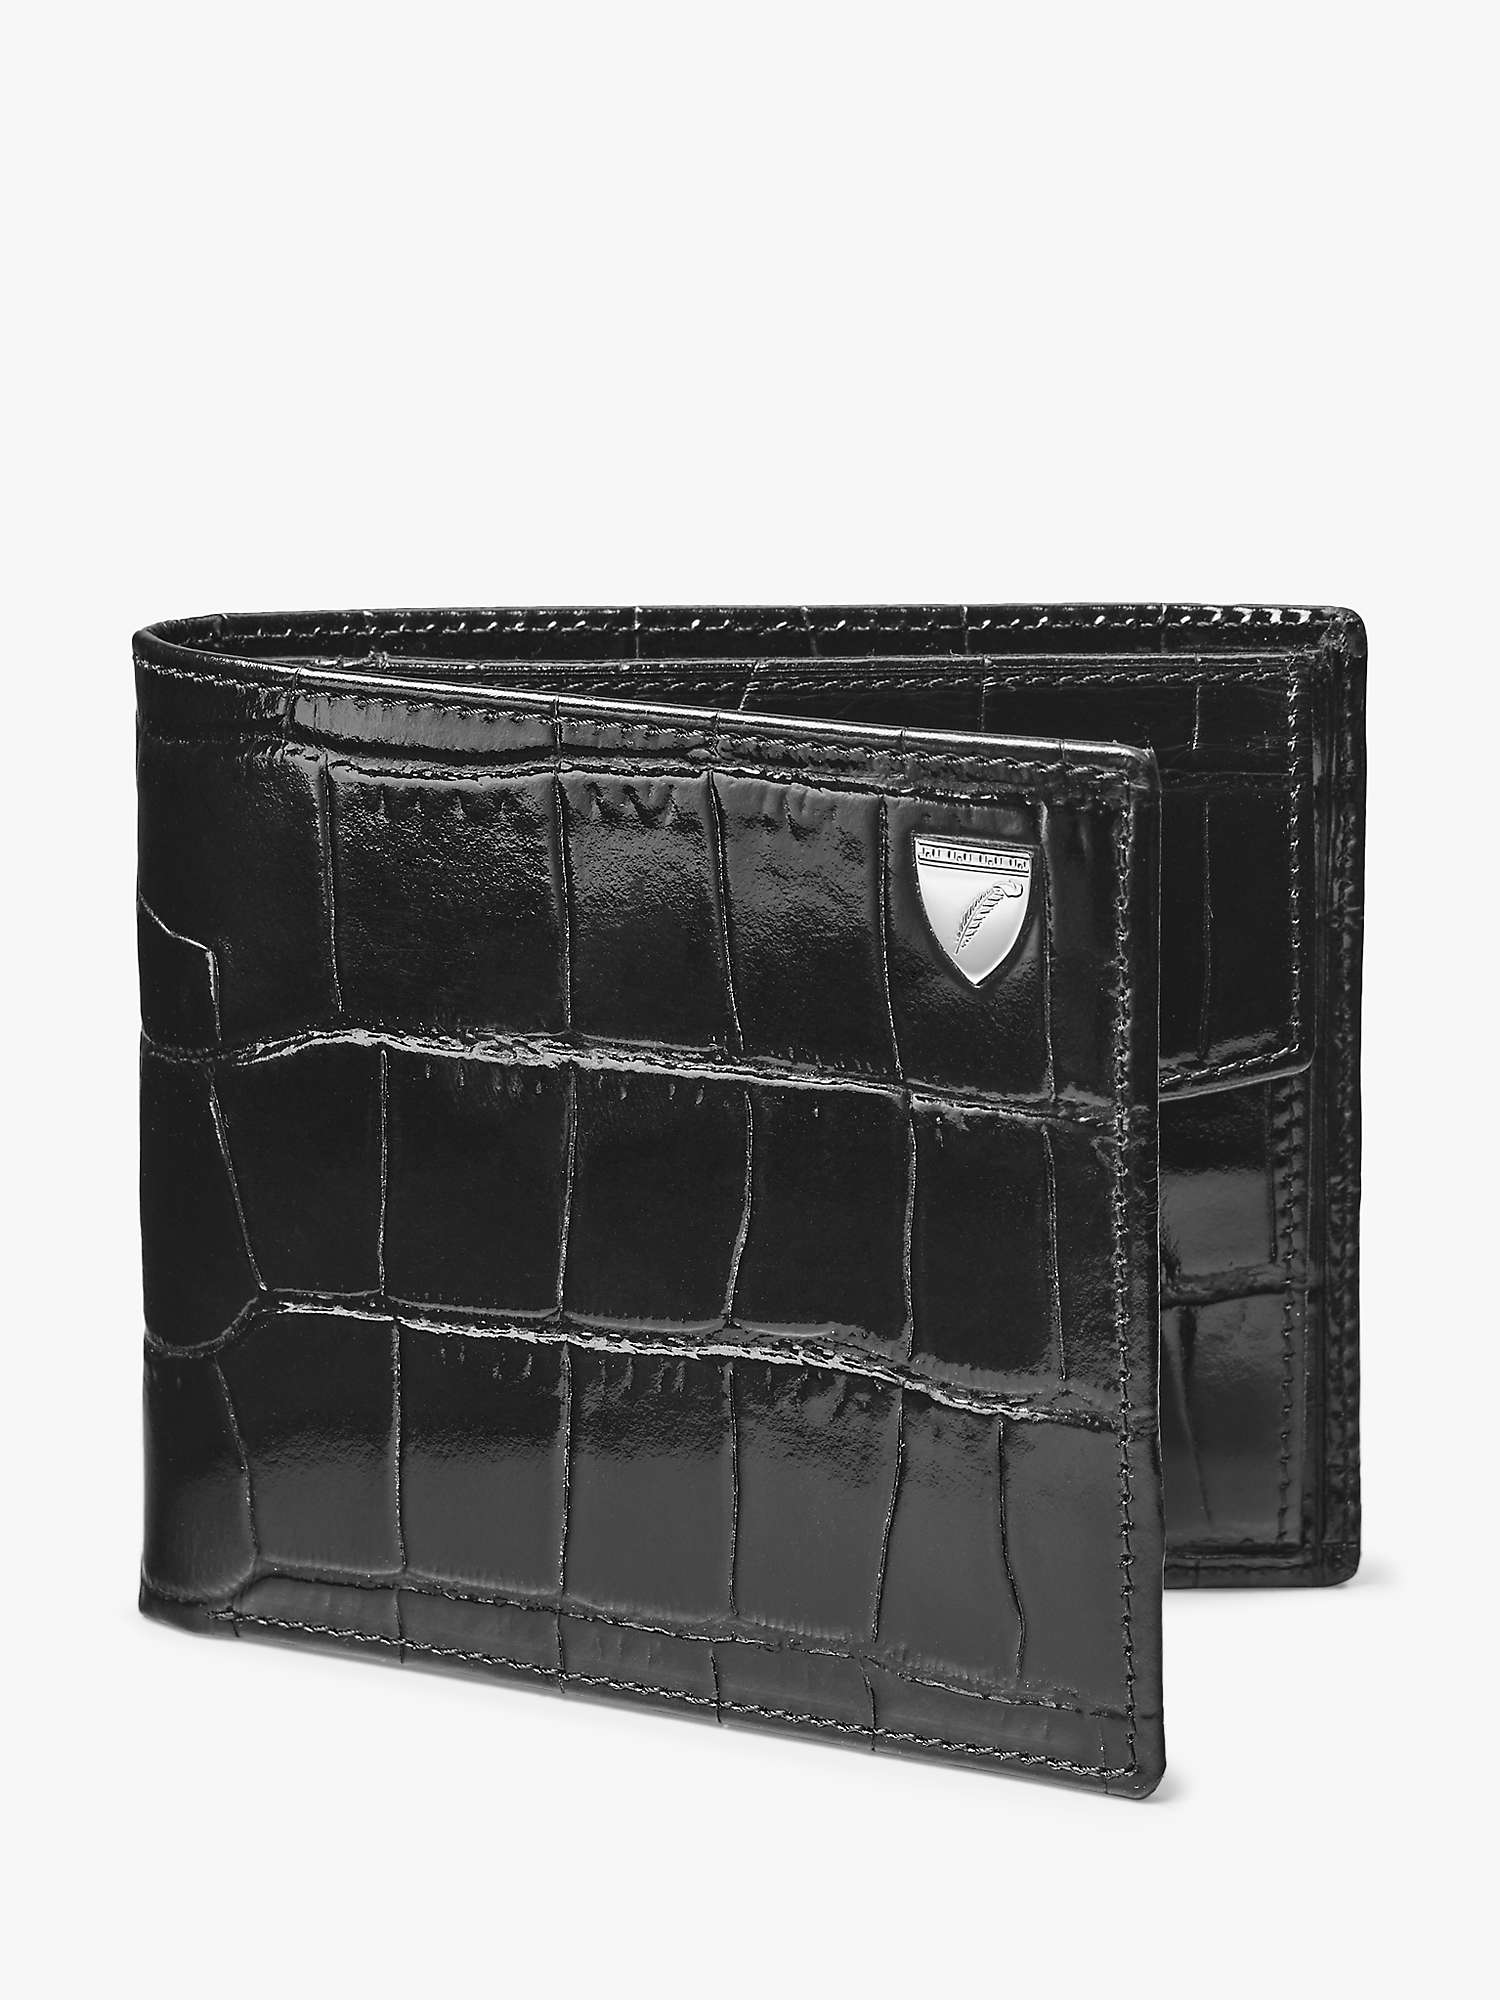 Buy Aspinal of London Billfold Croc Leather Coin Wallet Online at johnlewis.com